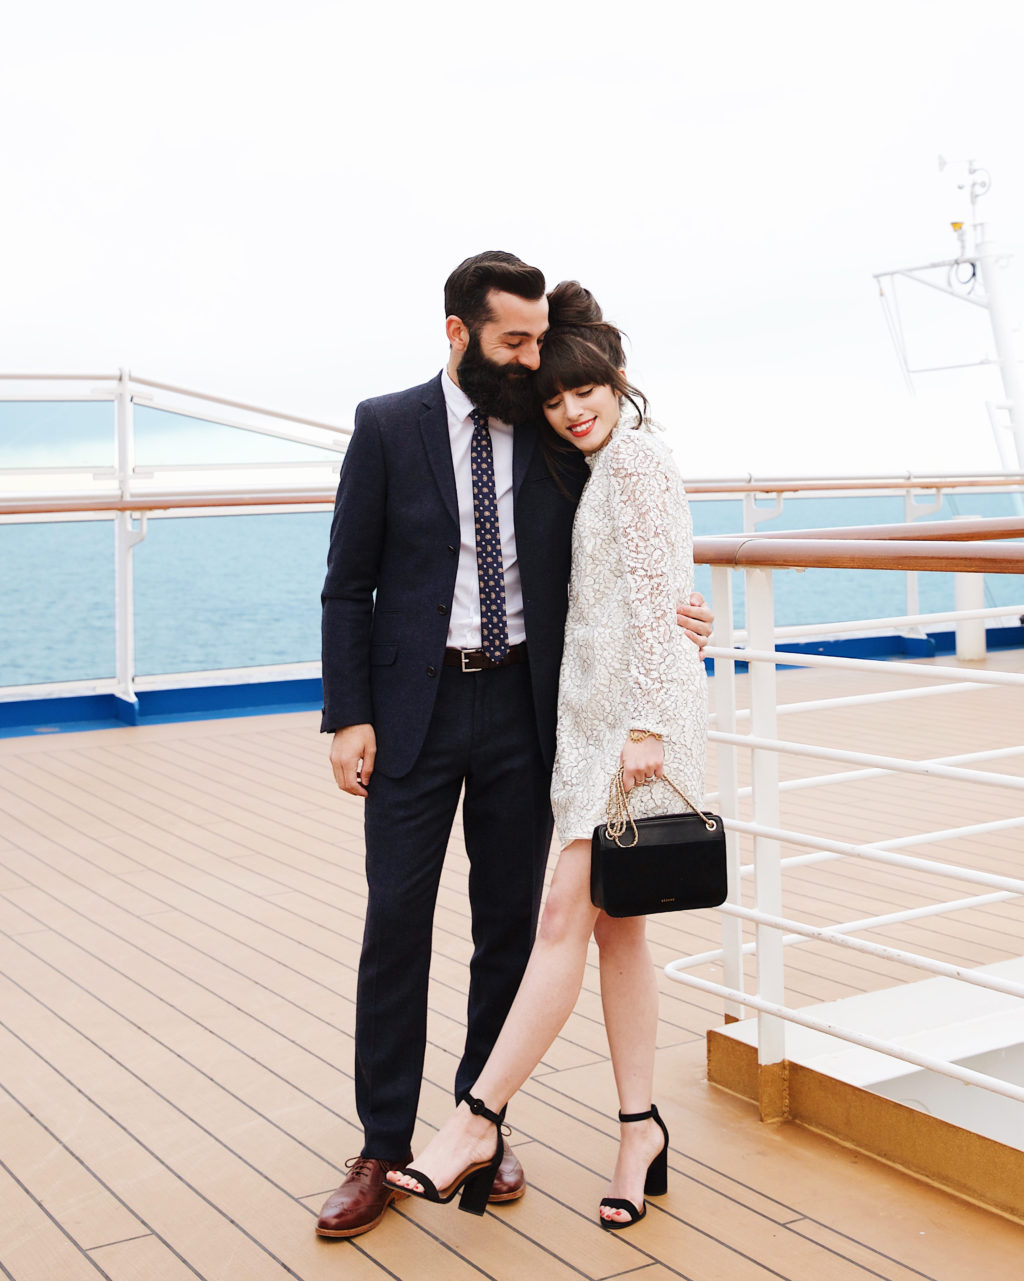 What to Wear on Formal Night: Recommendations for Cruise Formal Wear